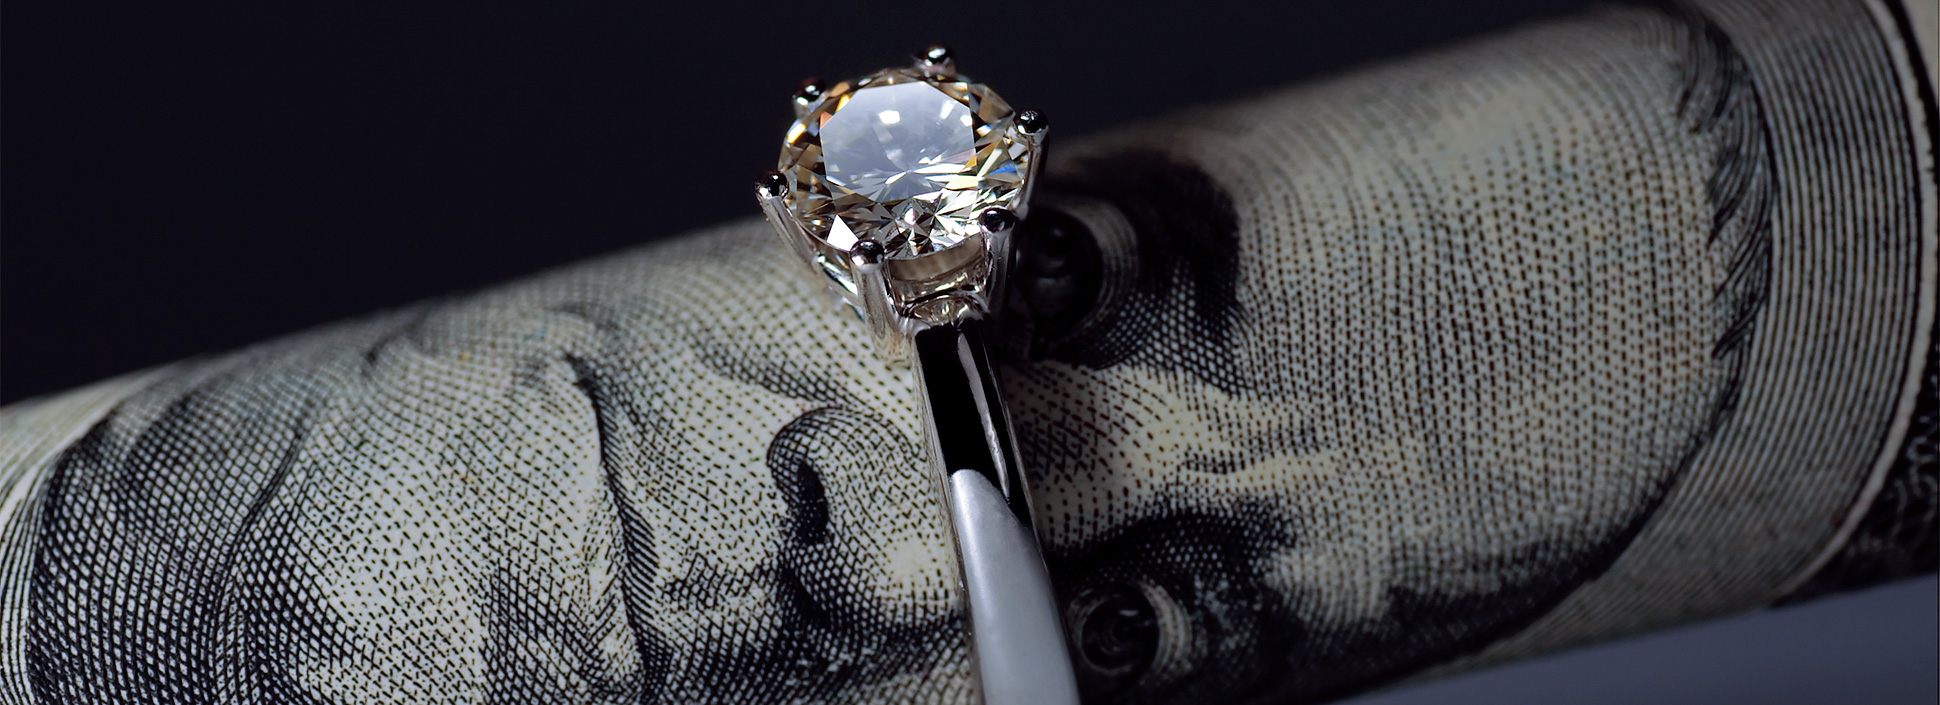 How much should you spend on an engagement ring? | money.co.uk